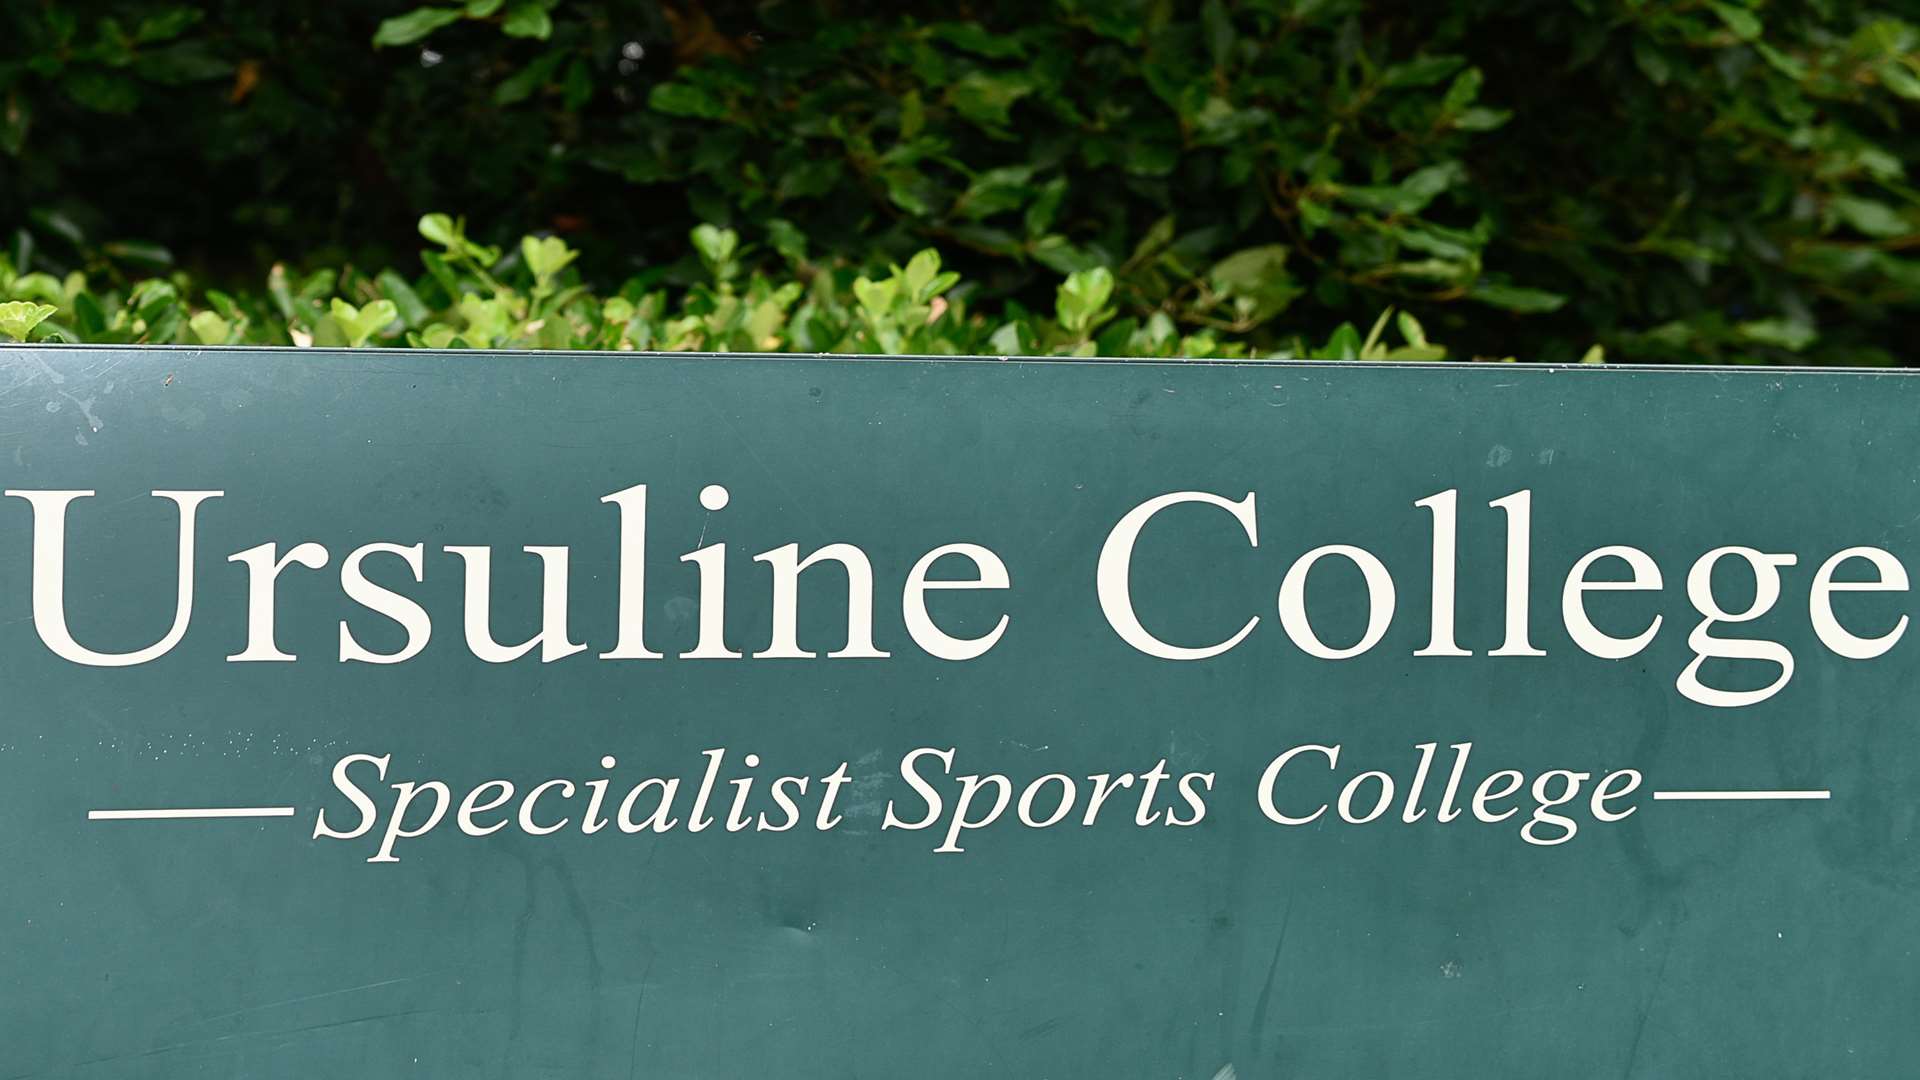 Ursuline College has sent a letter to reassure parents that no child was in danger on Friday